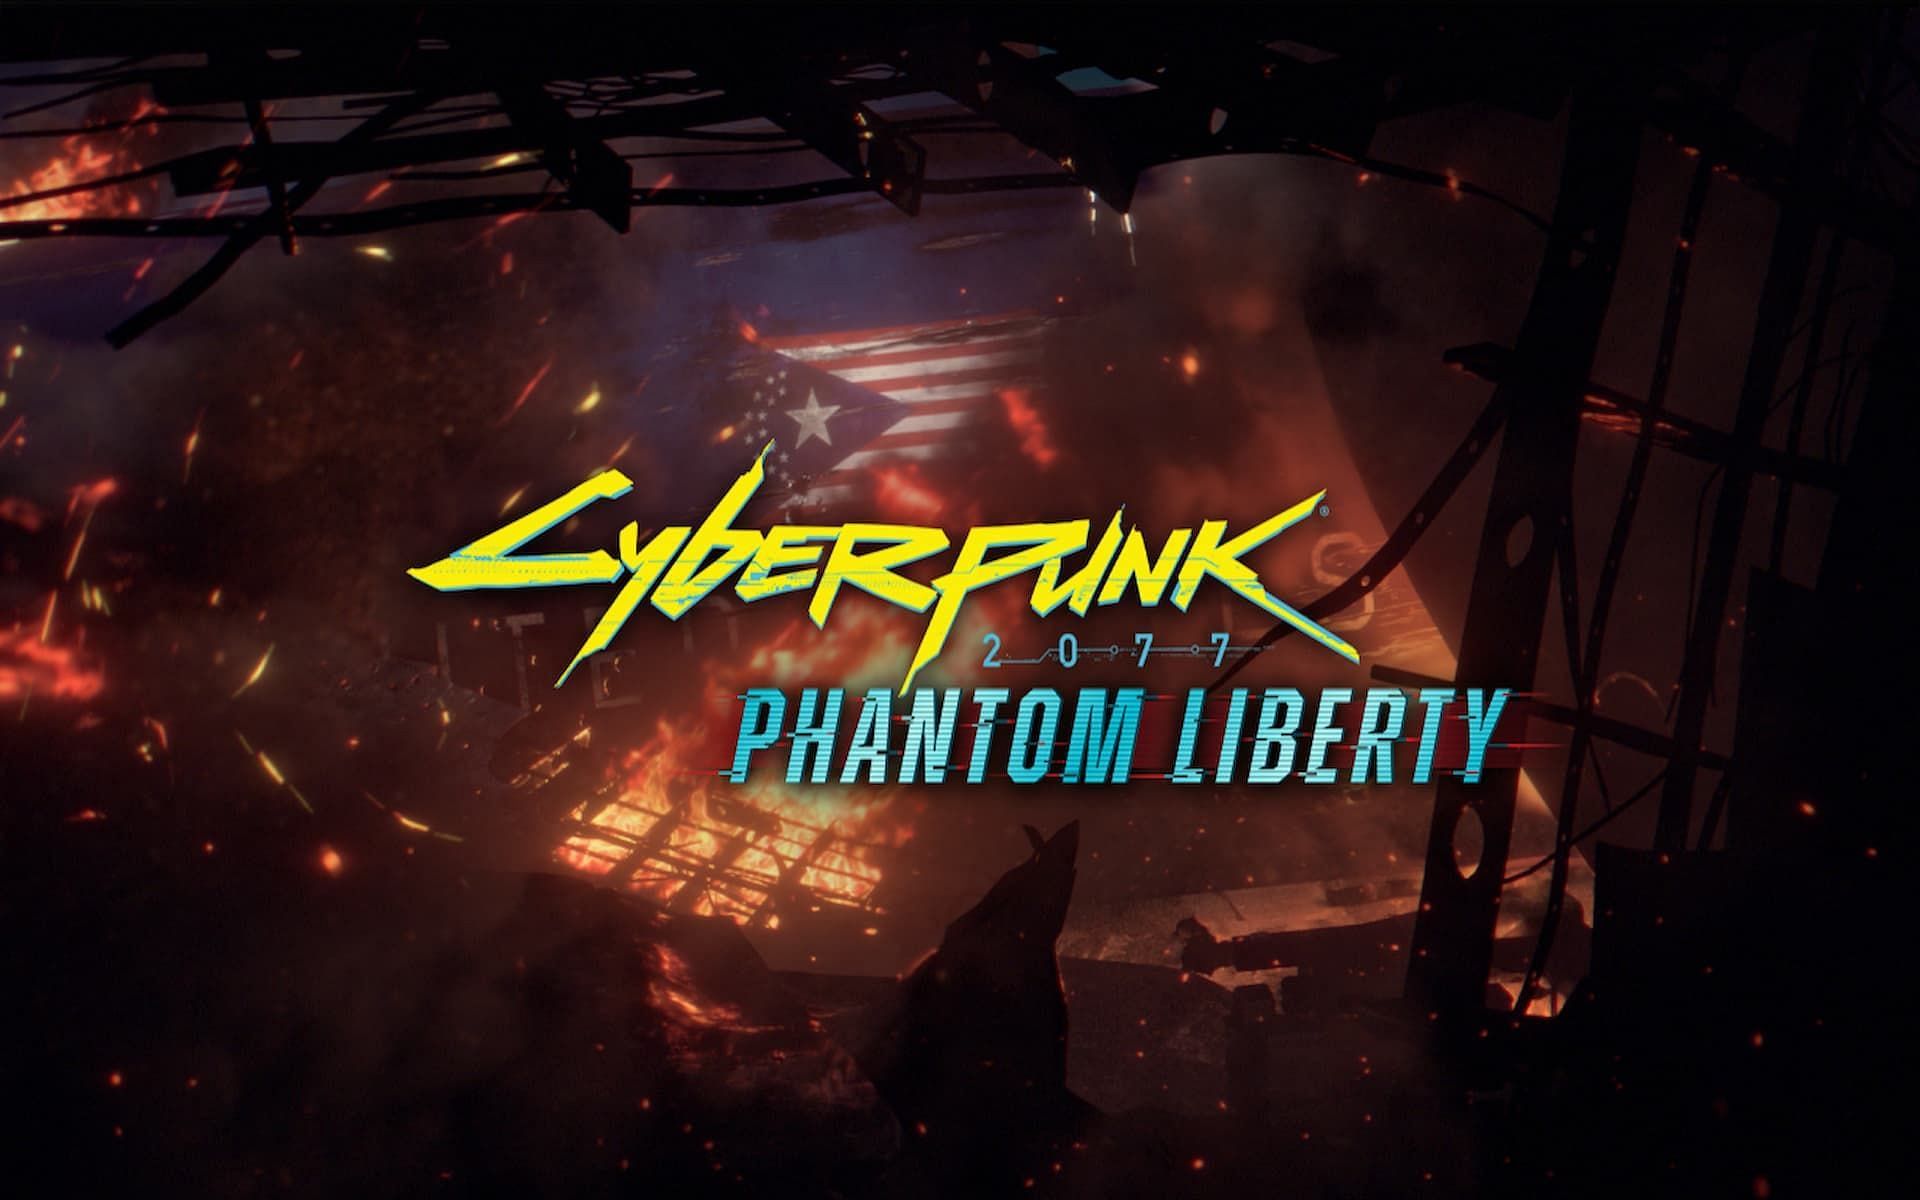 Phantom Liberty is the first major expansion for Cyberpunk 2077 (Image via CD Project Red)